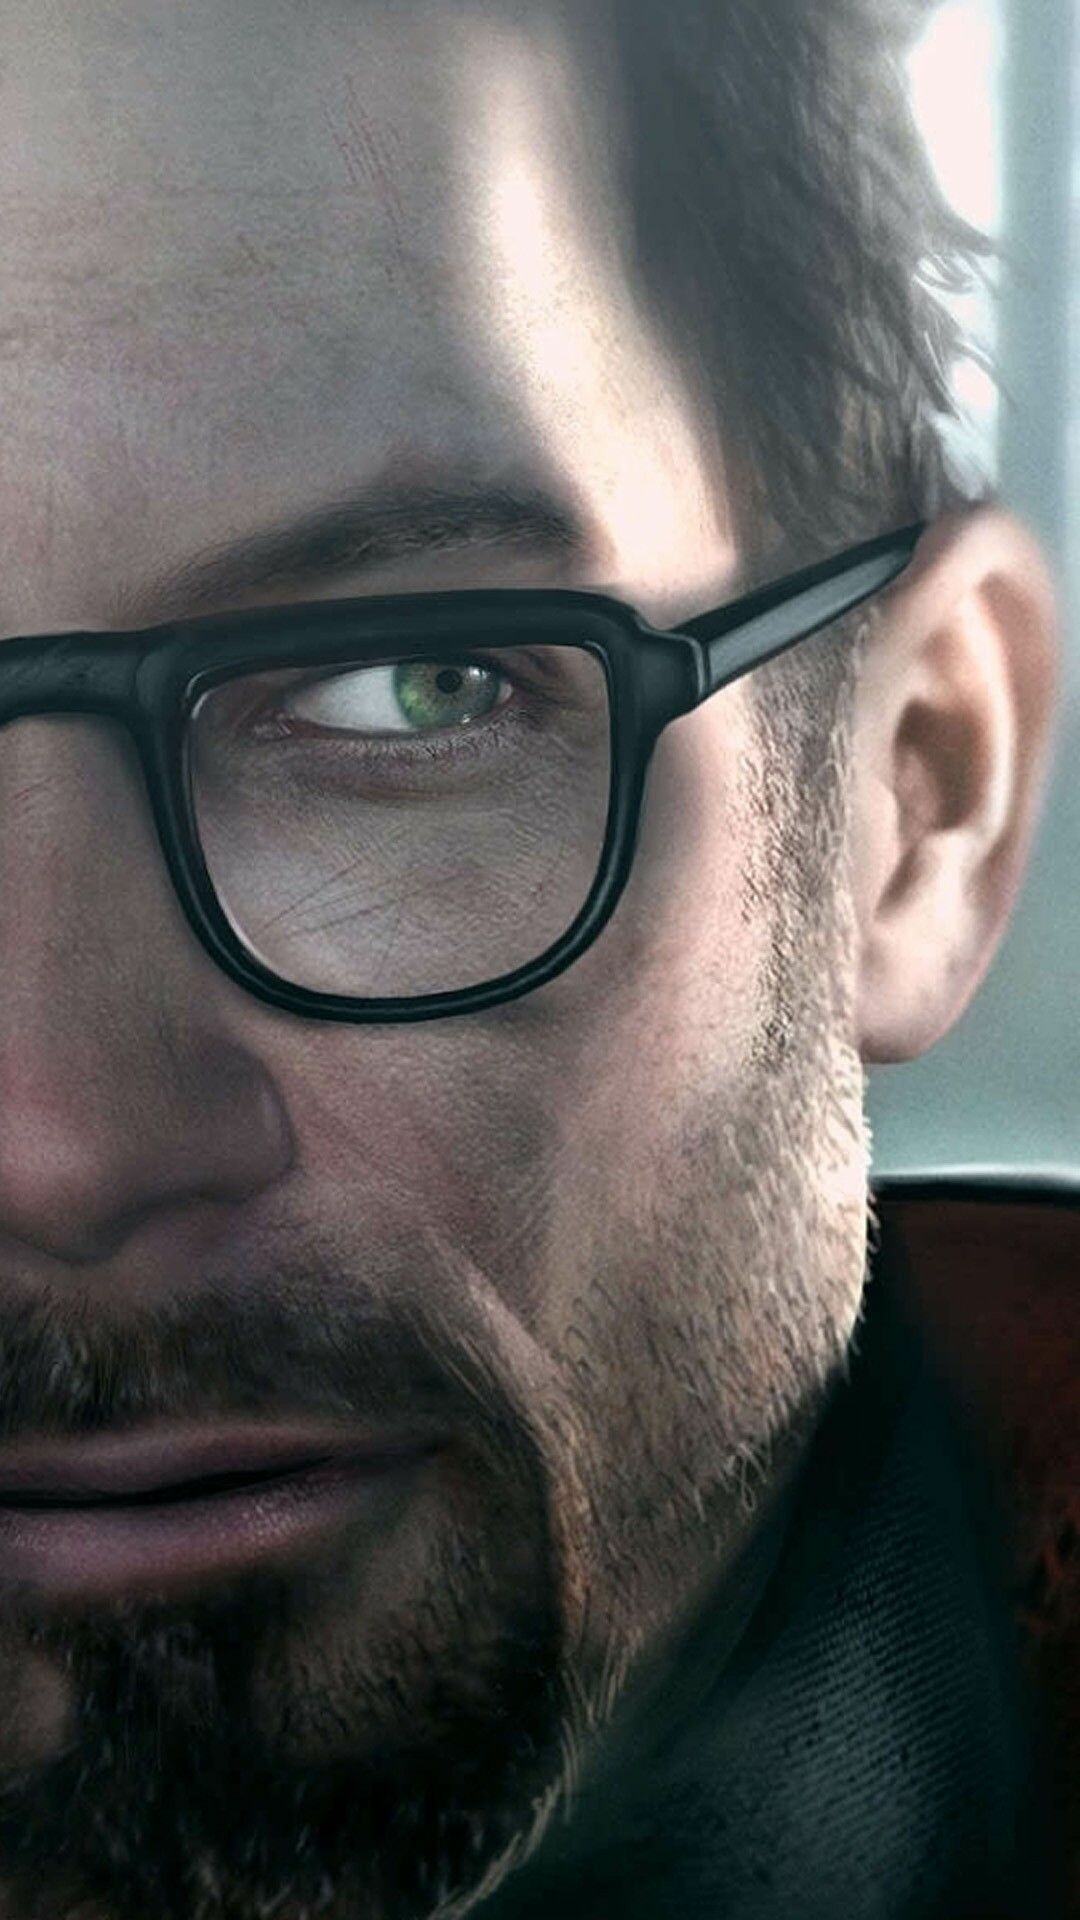 Half-Life 2: Gordon Freeman, Considered to be one of the greatest video game characters of all time. 1080x1920 Full HD Wallpaper.